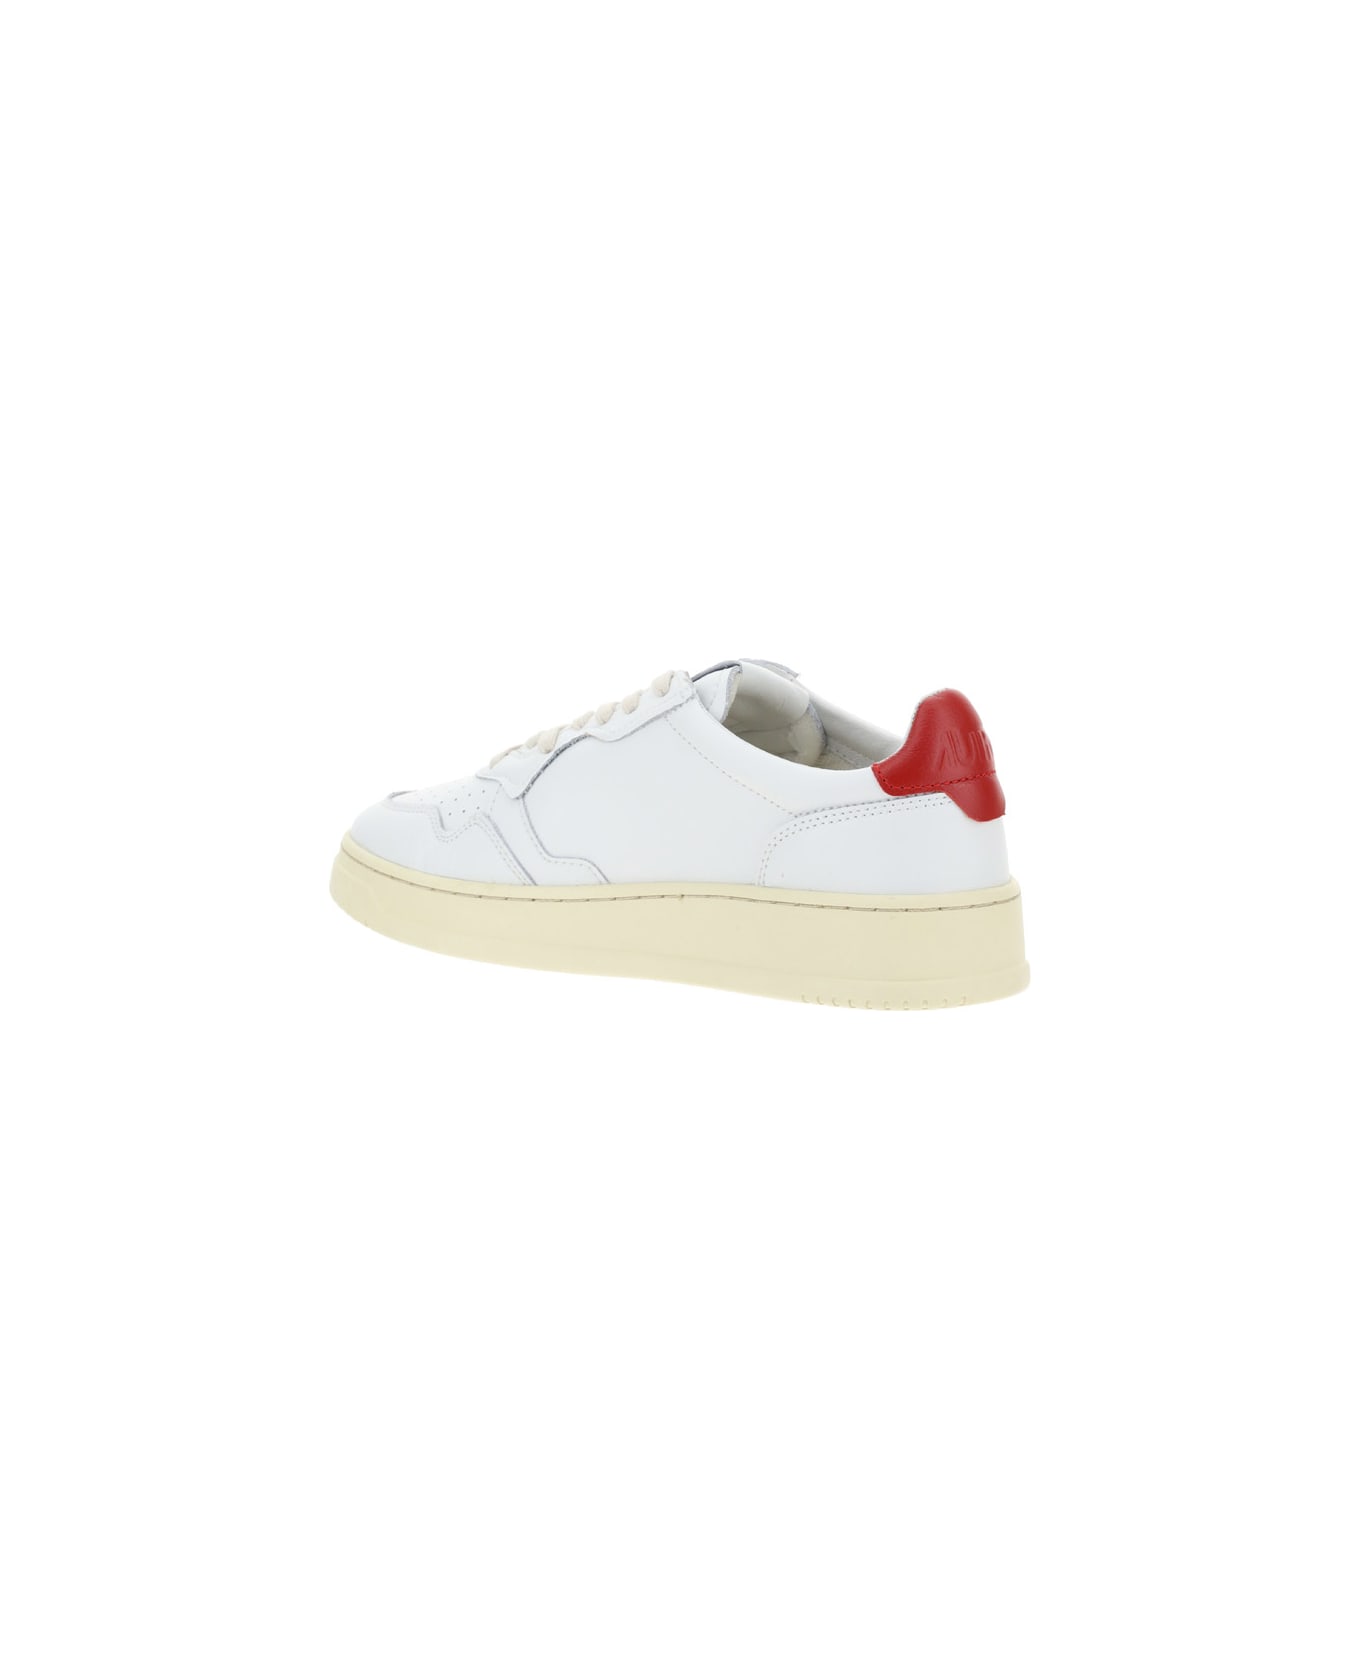 Autry Low 01 Sneakers - Wht/red スニーカー